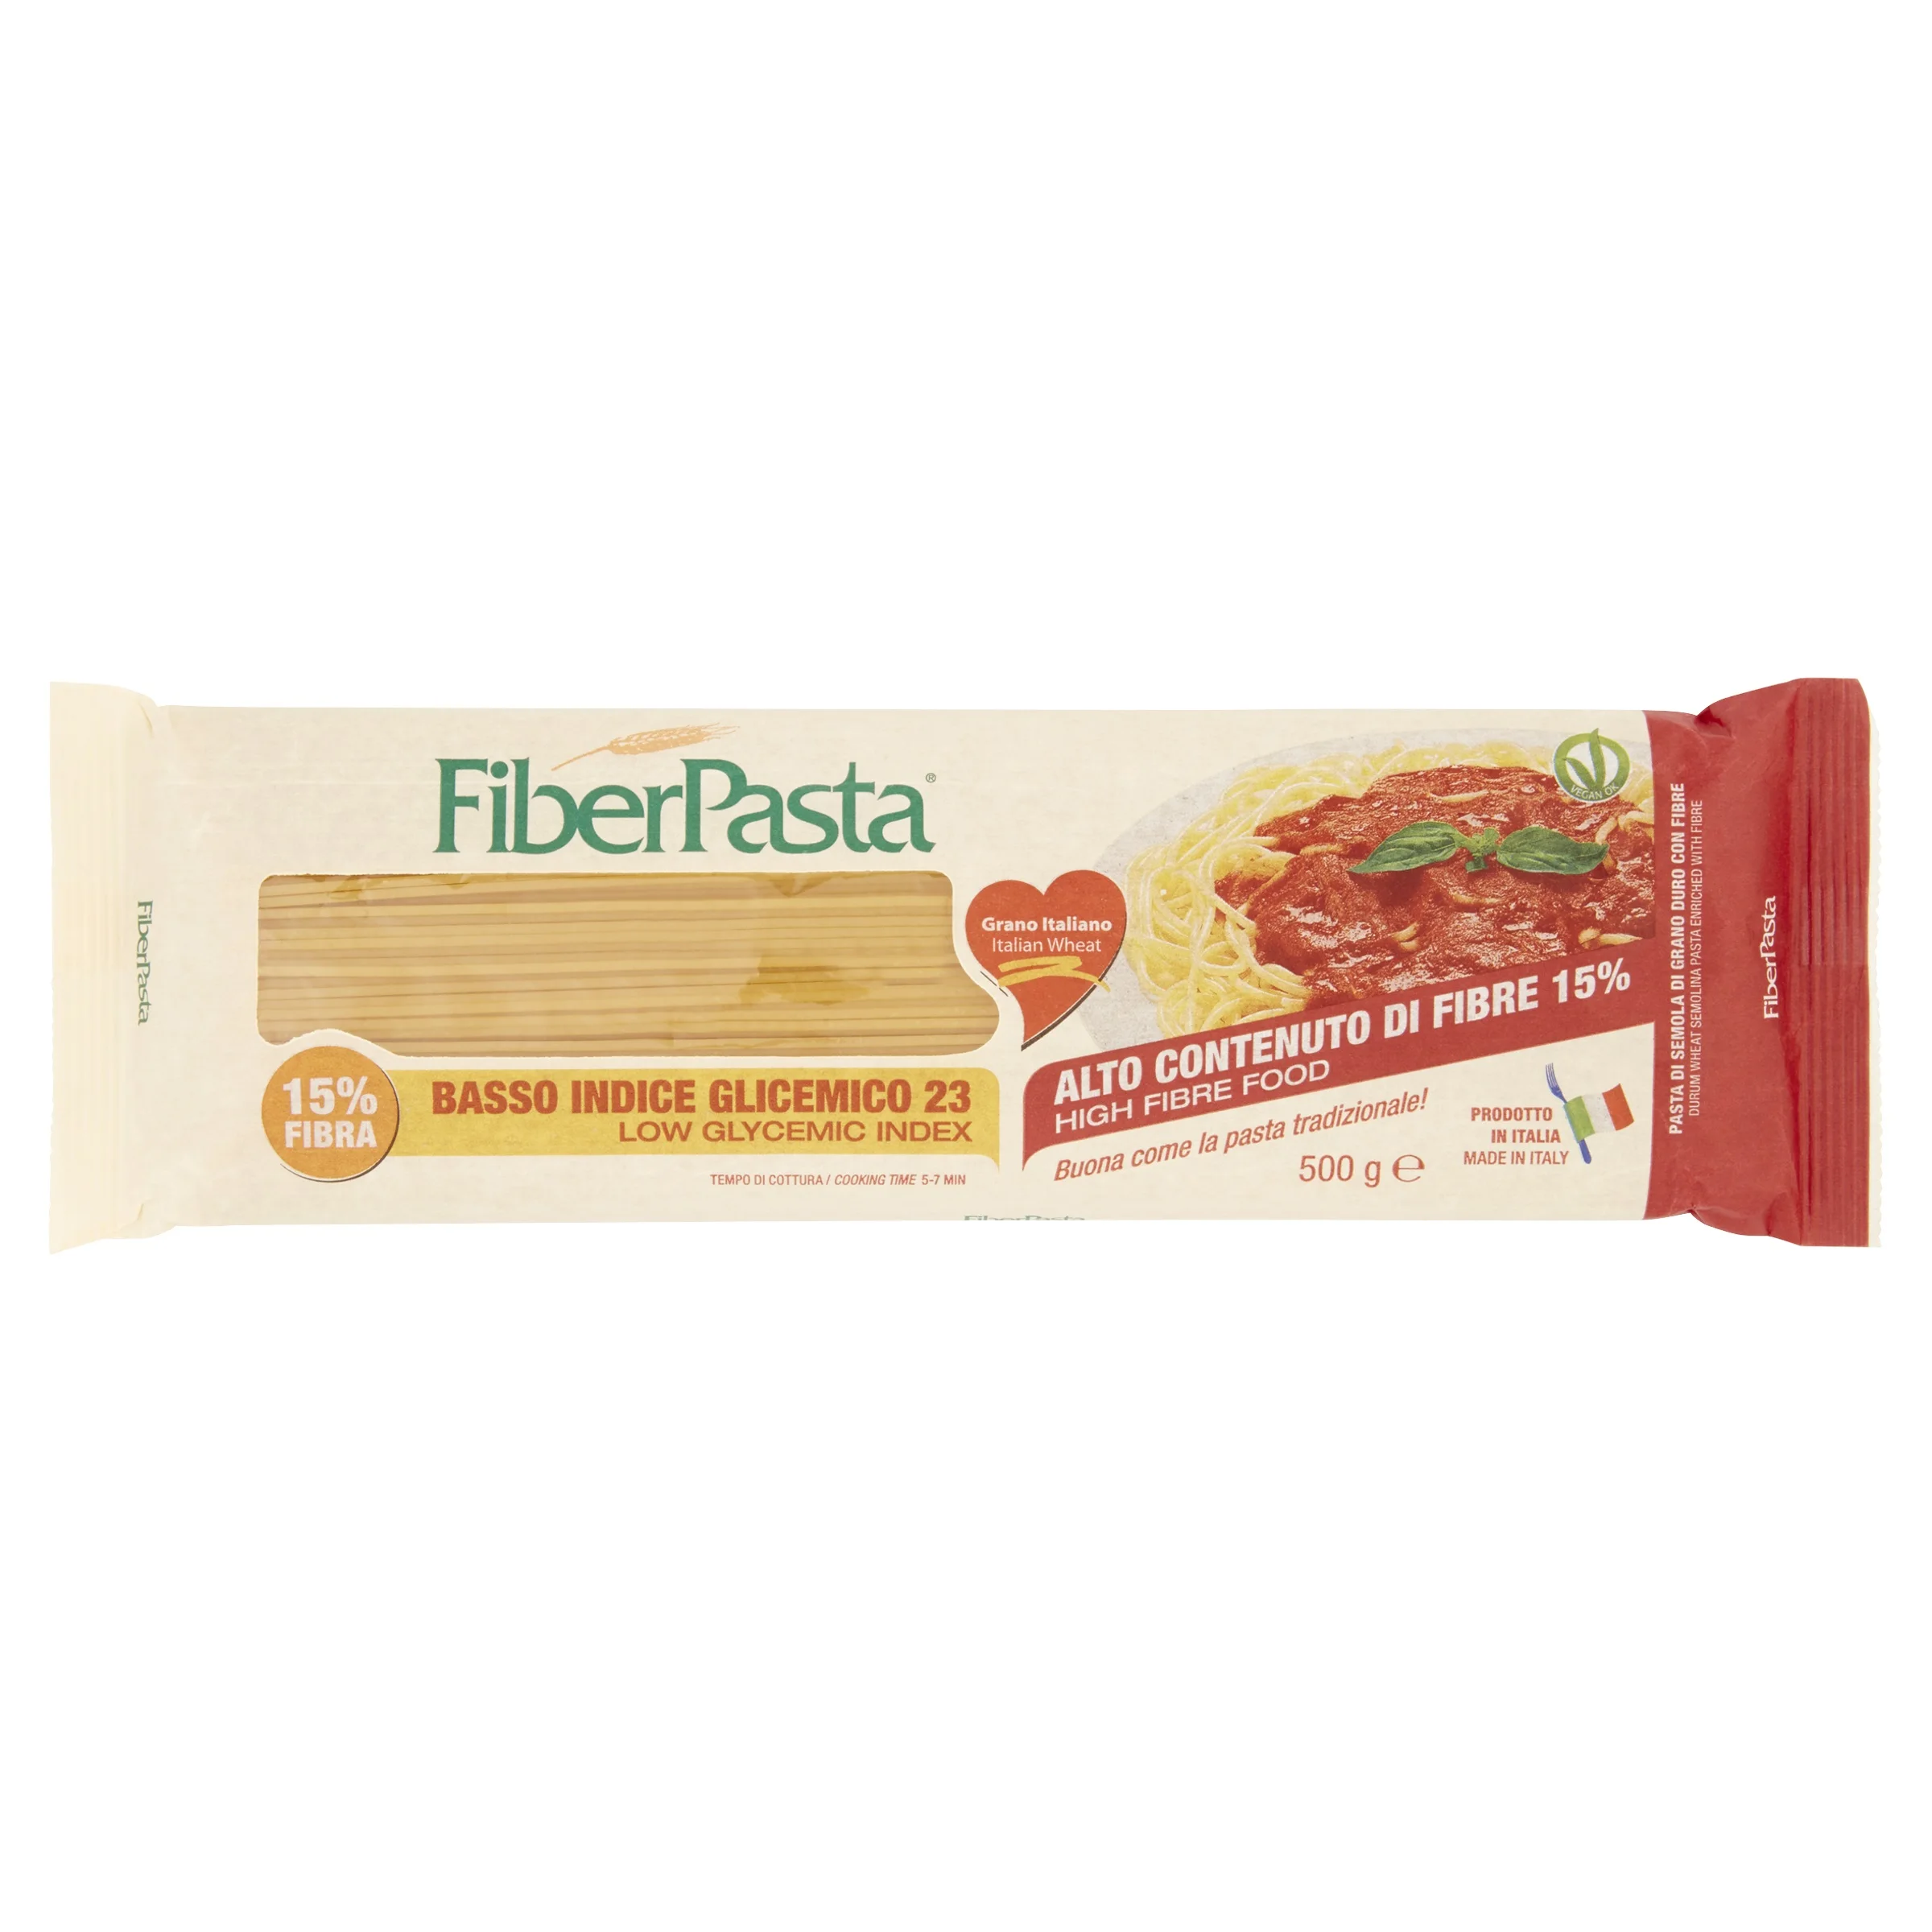 PREMIUM QUALITY ITALIAN SPAGHETTI 500g - LOW GLYCEMIC INDEX - WITH HIGH FIBRE AND LOW NICKEL  - PASTA WITH BENEFITS